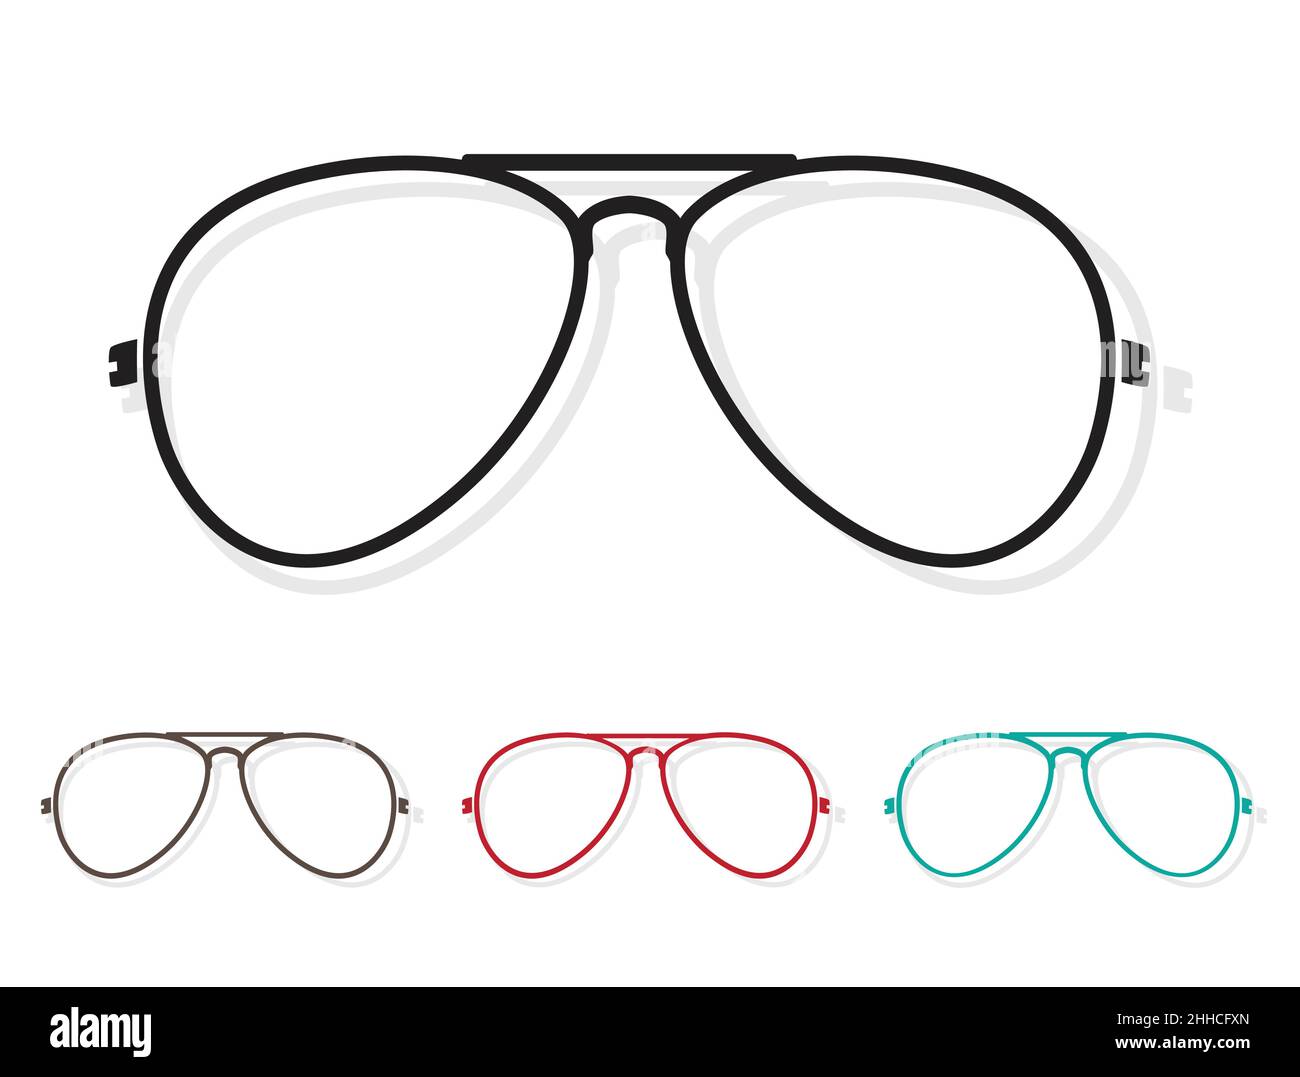 Green eyeglasses Stock Vector Images - Page 2 - Alamy